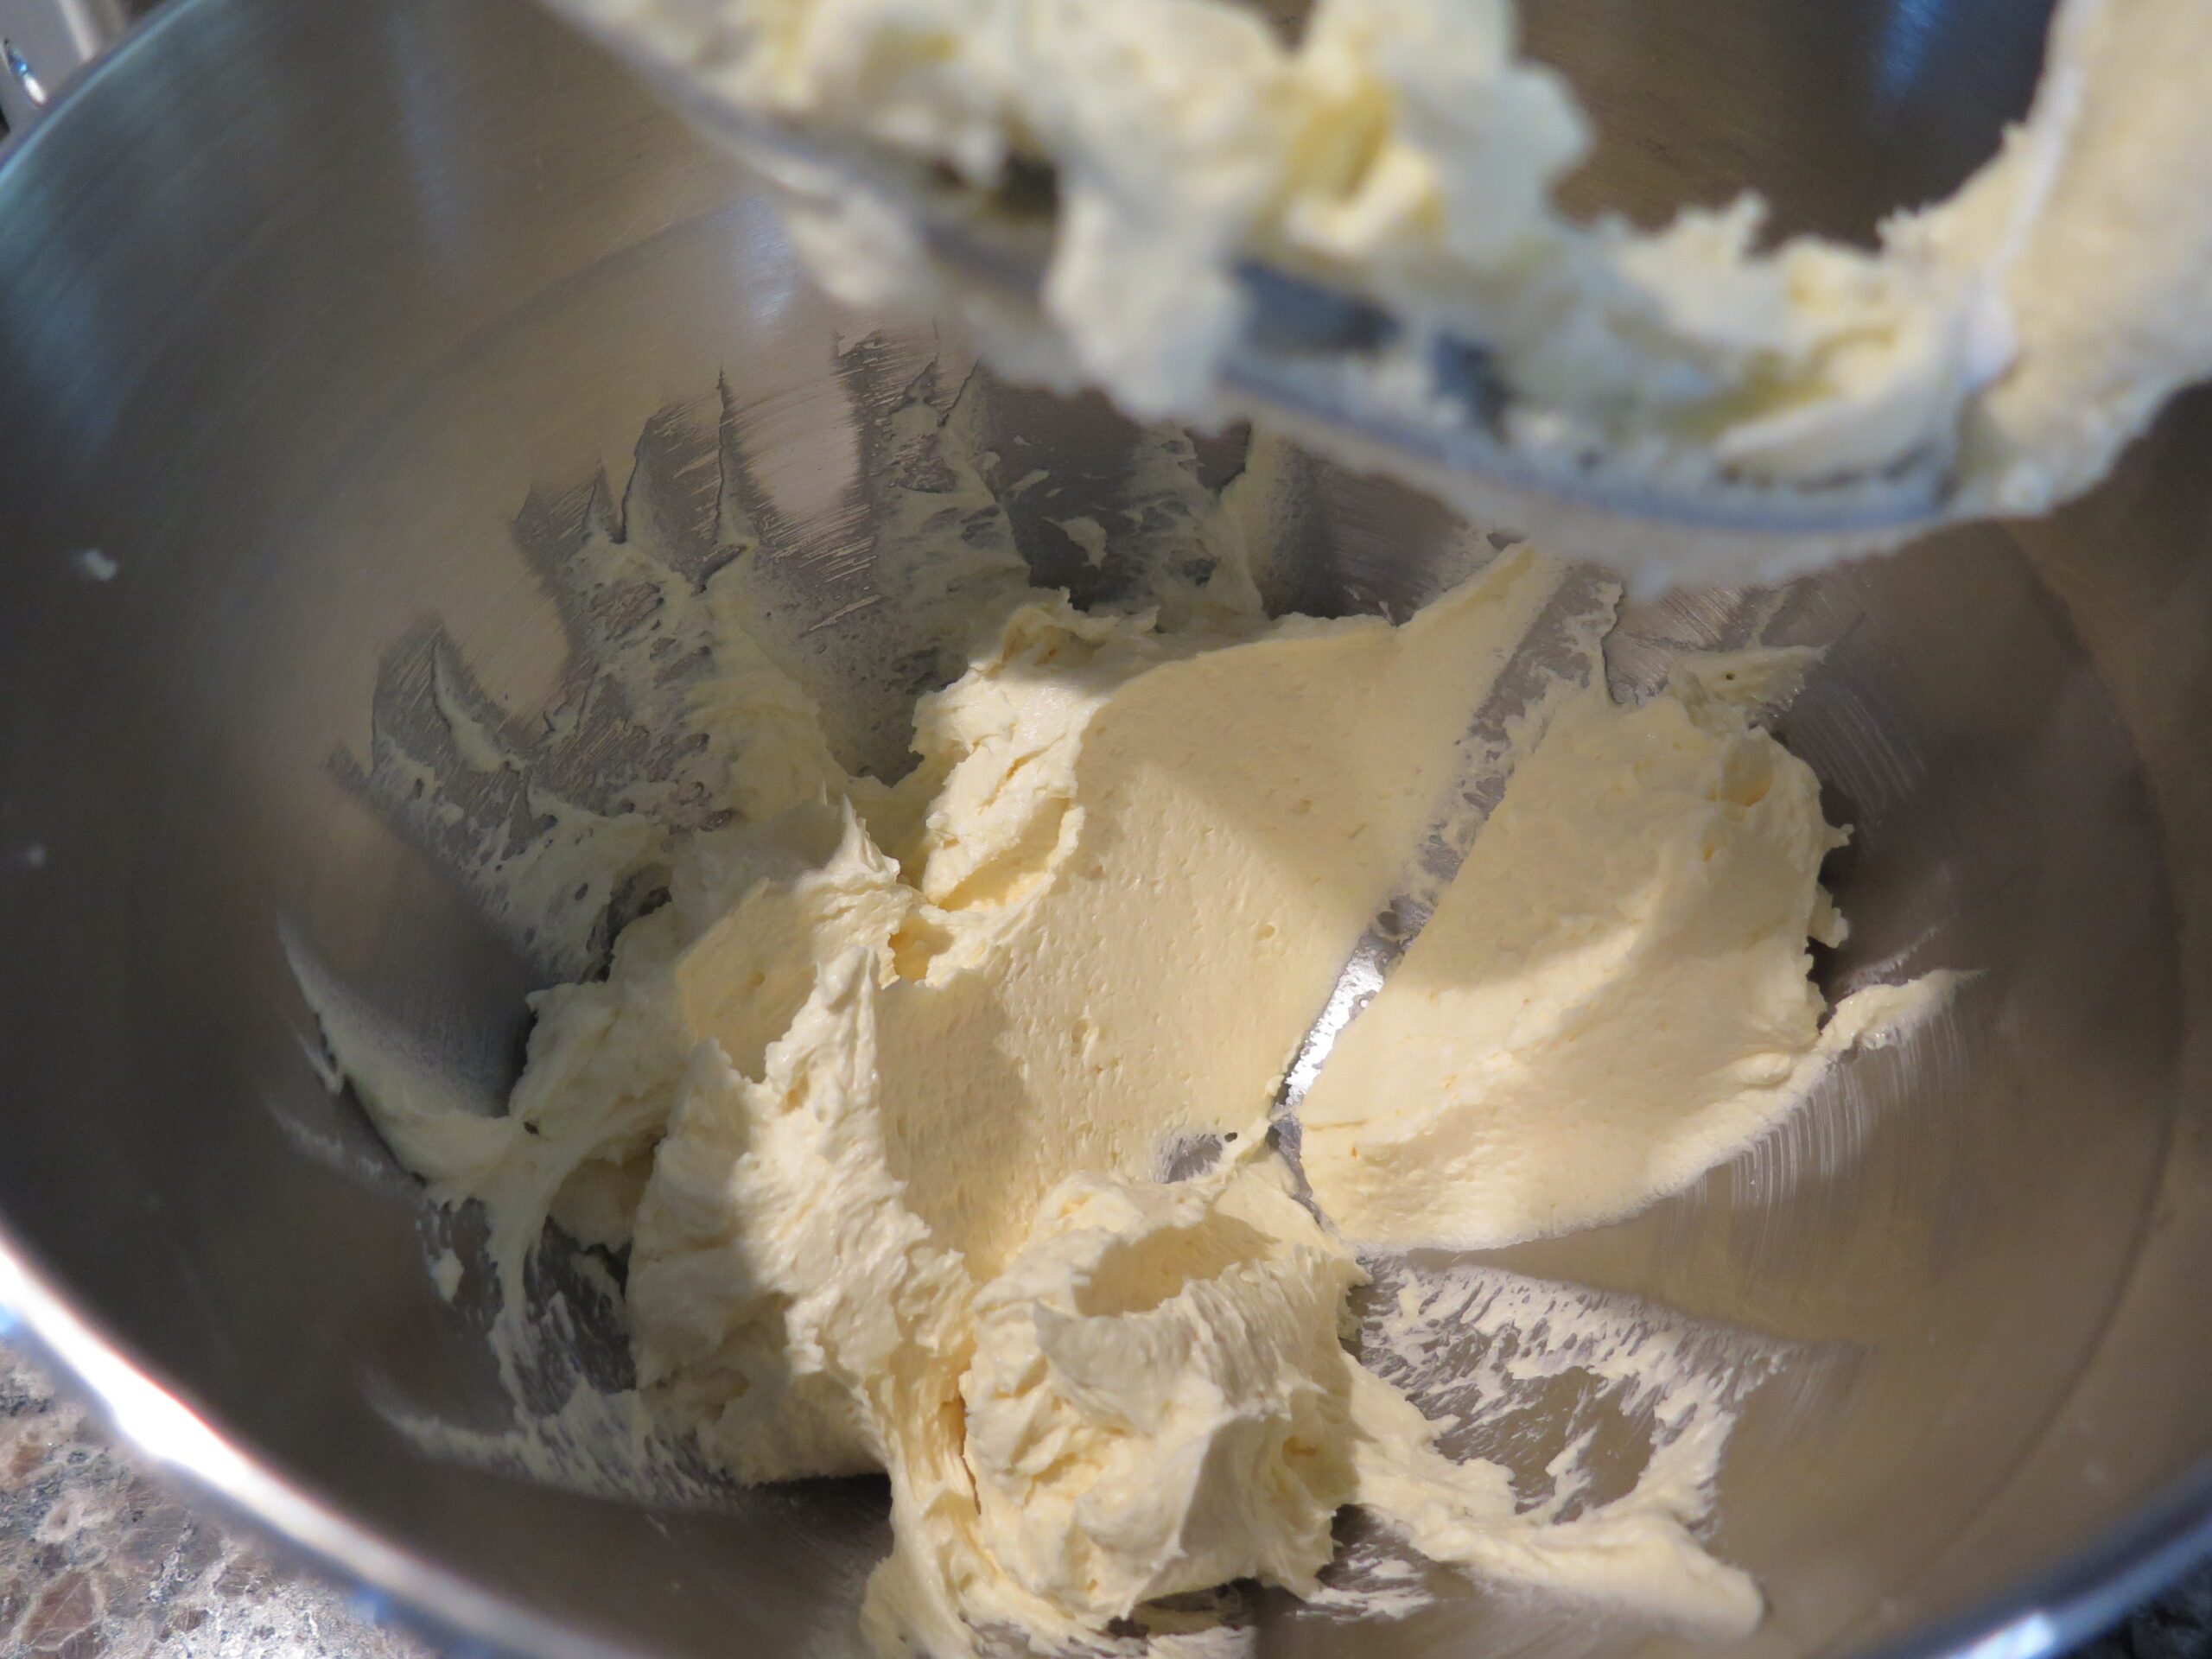 Creamed butter and sugar in a kitchen aid mixer